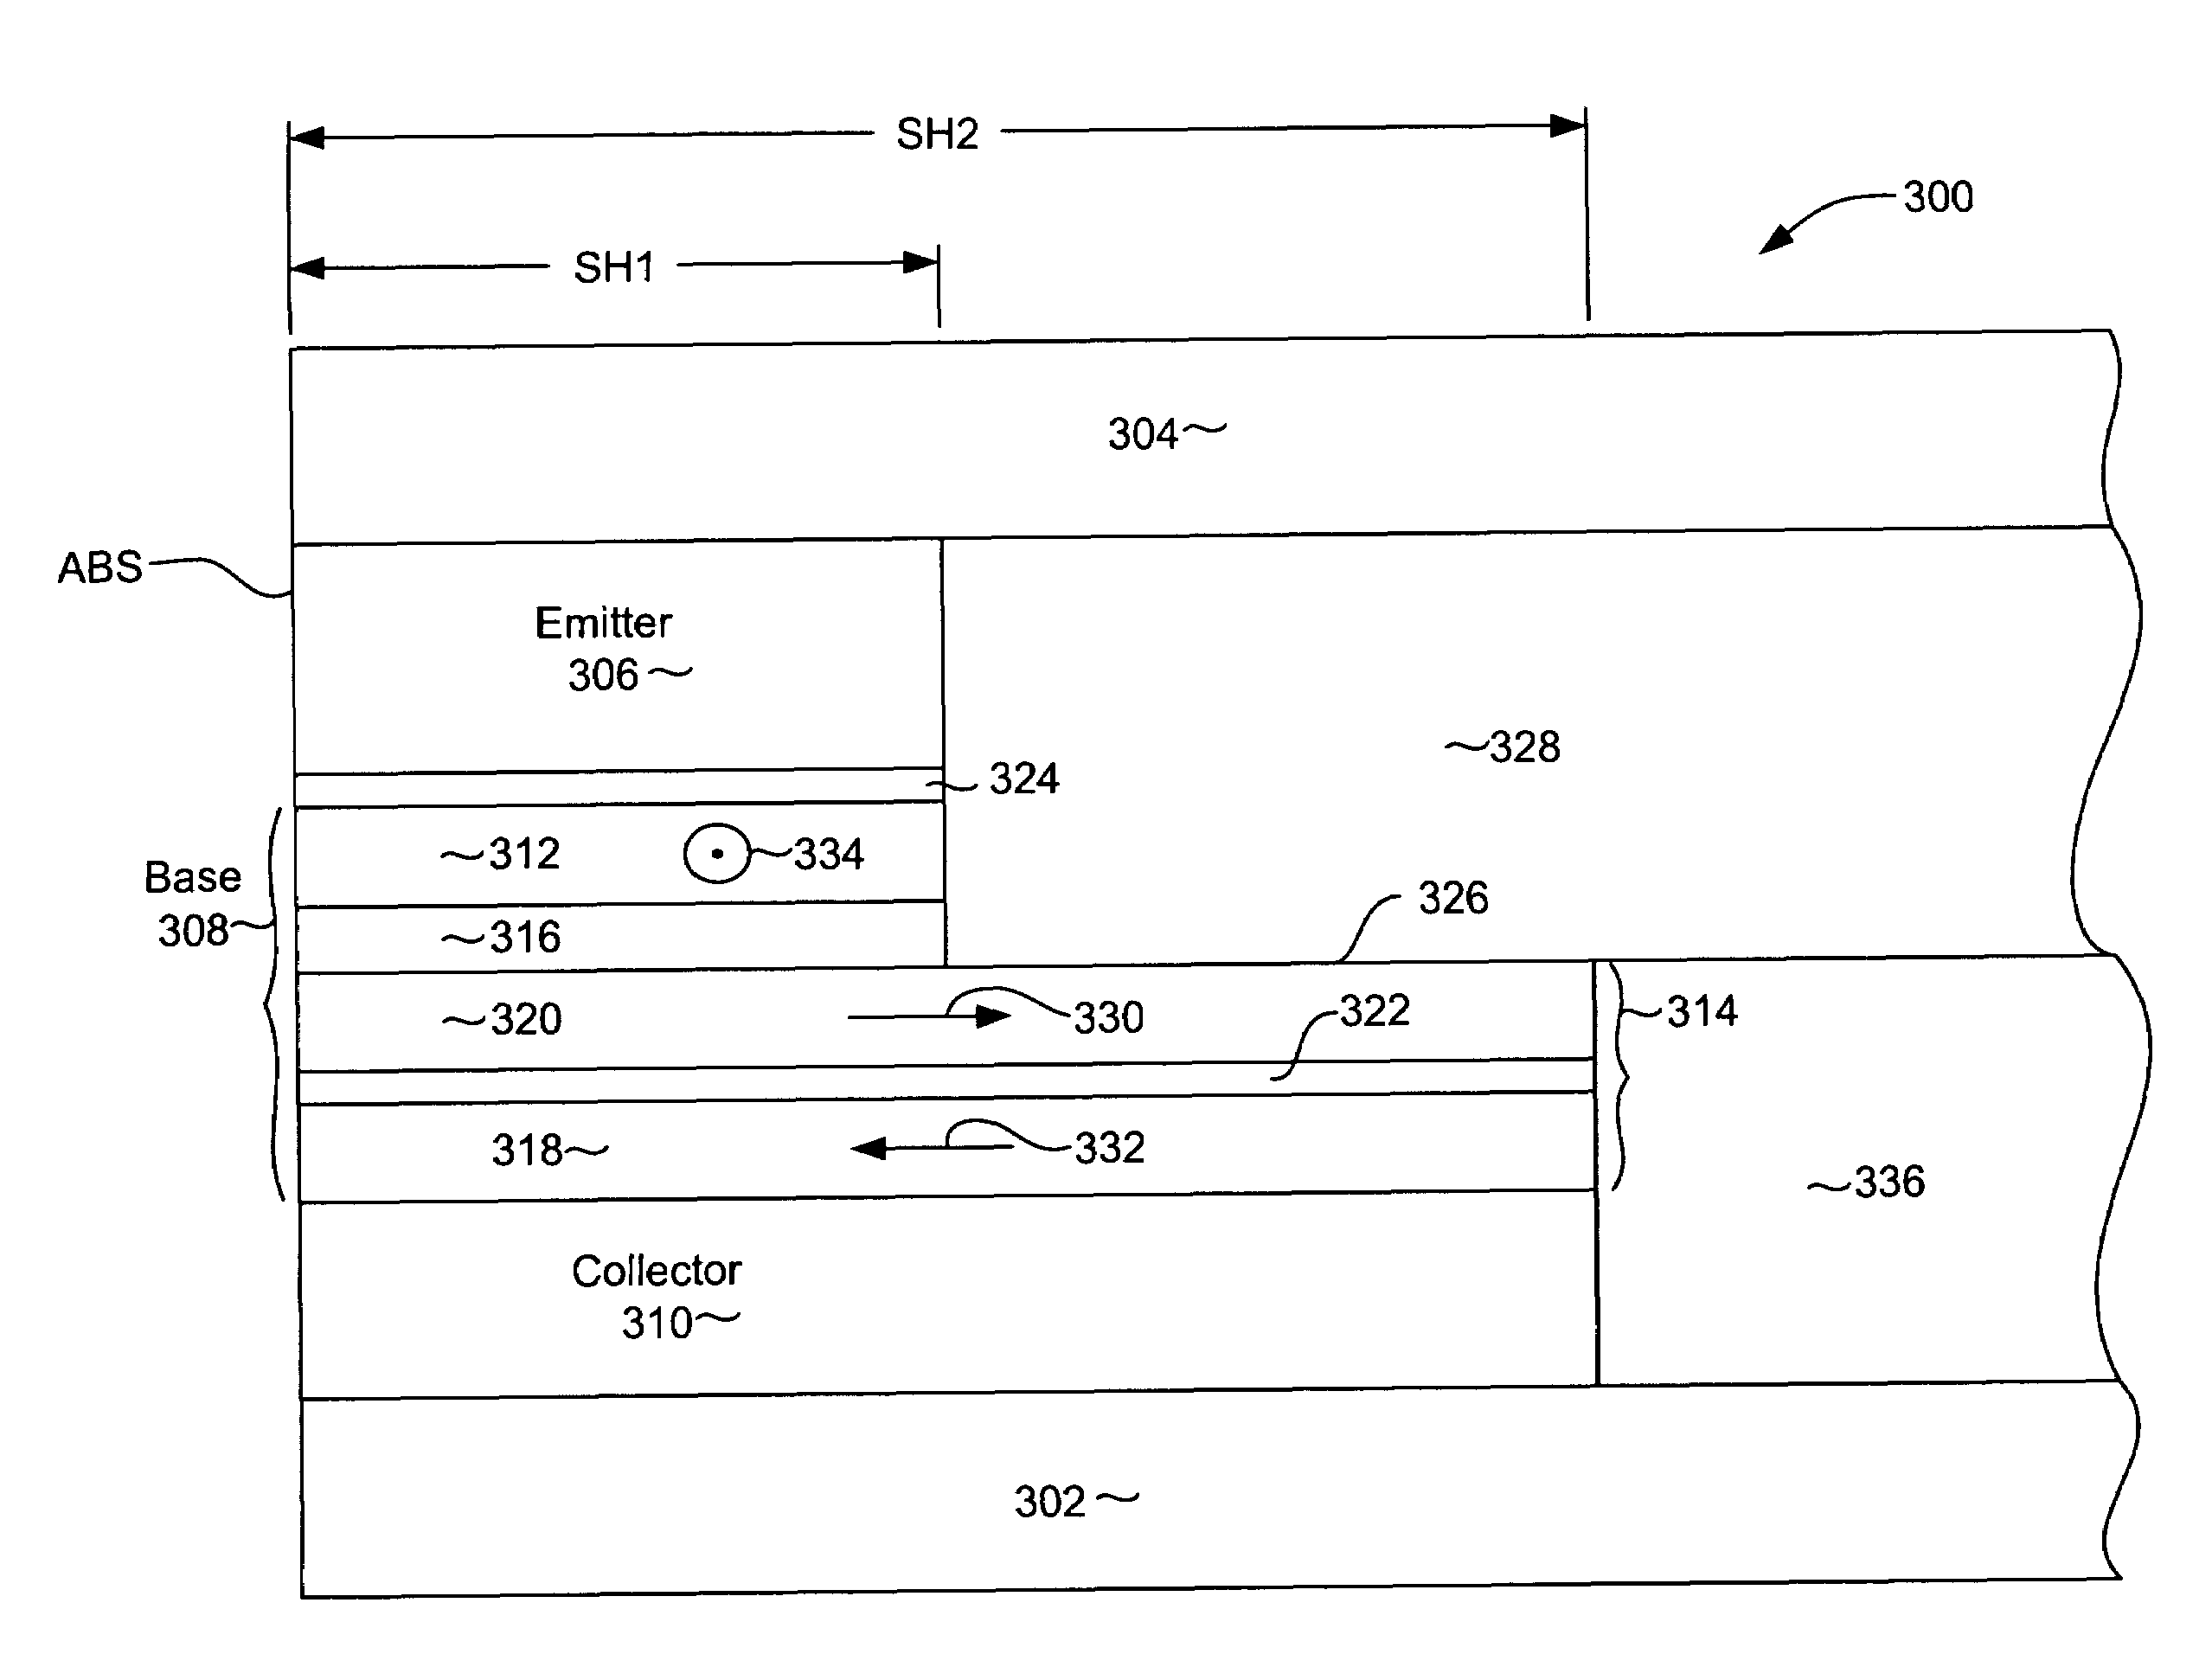 Magnetic tunnel transistor with high magnetocurrent and stronger pinning